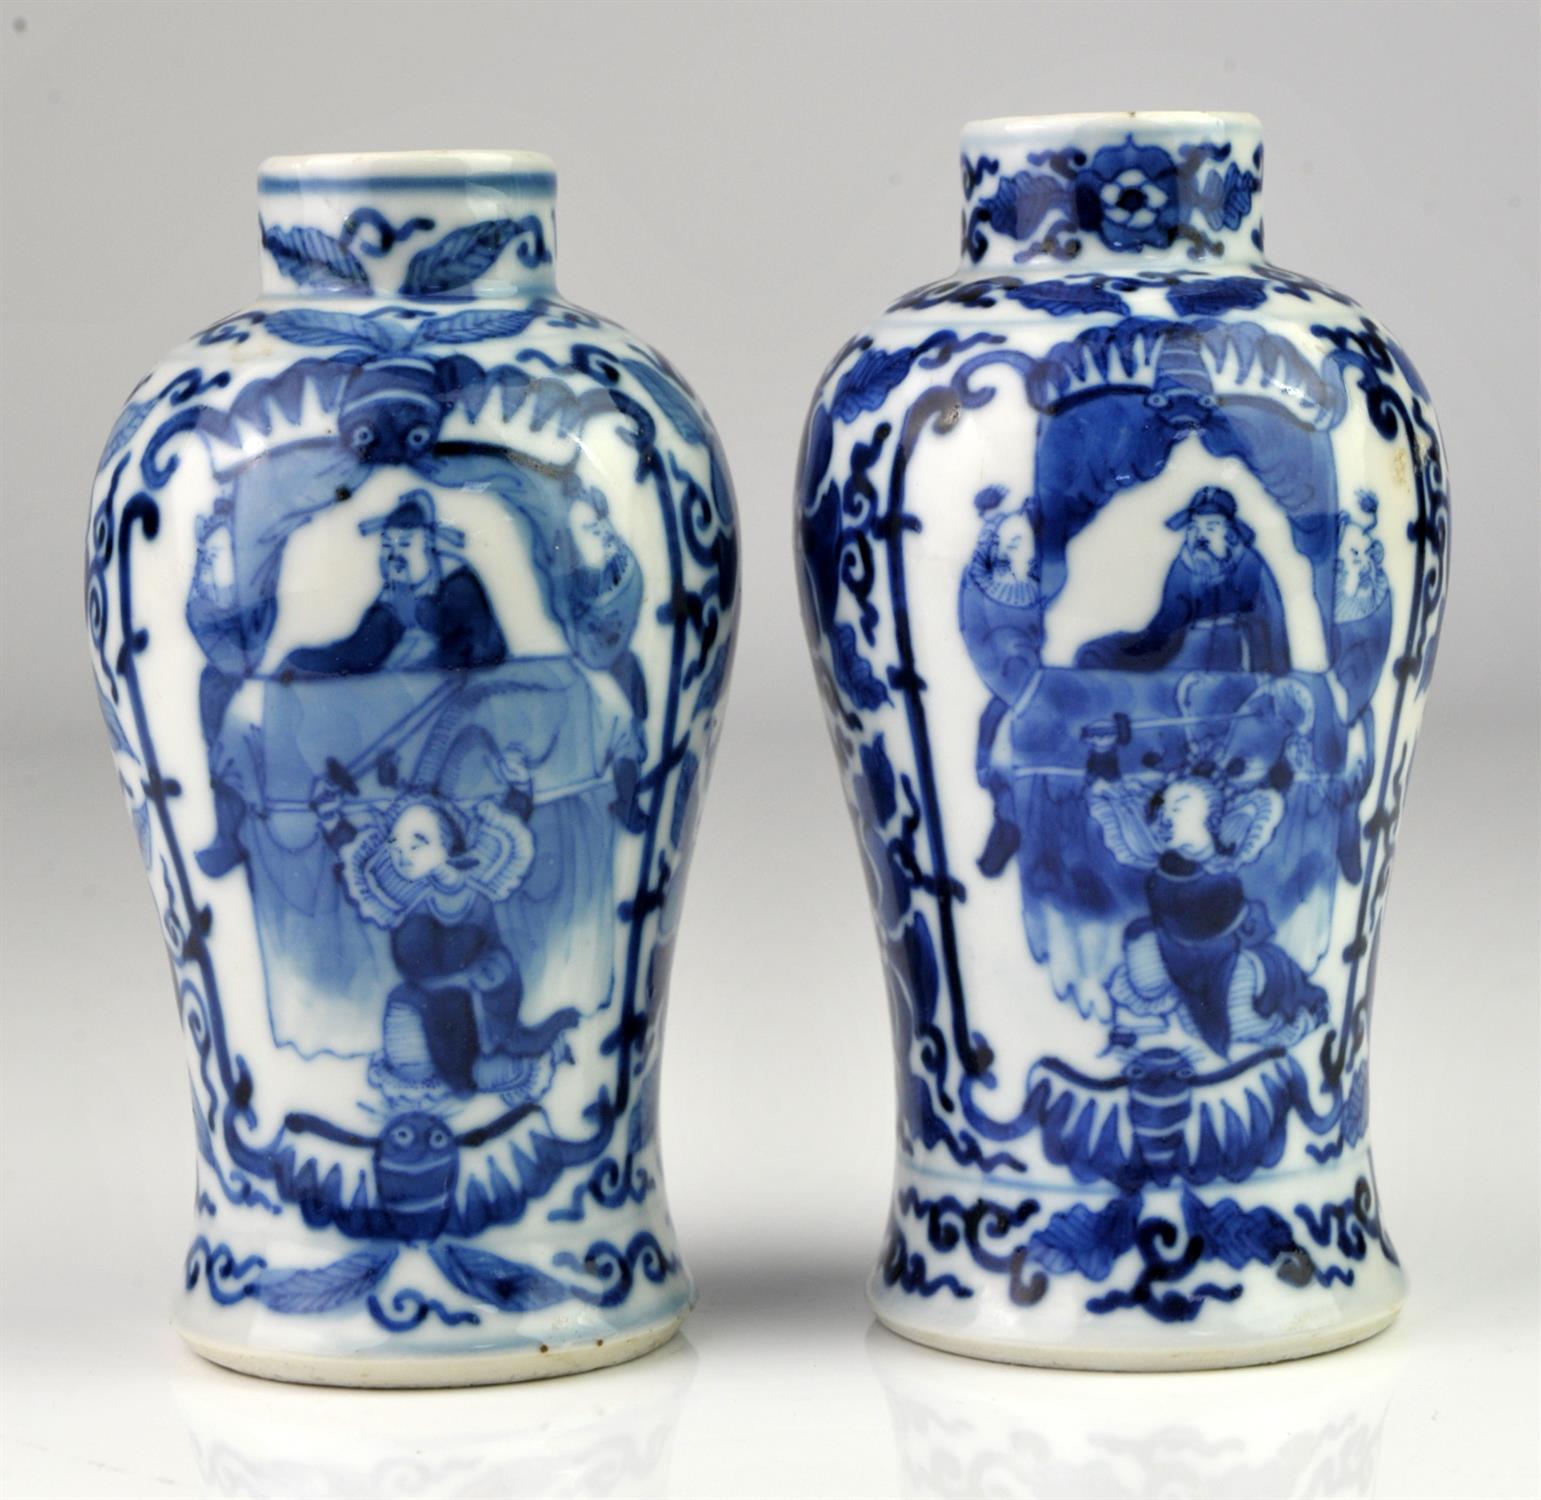 Matched pair of Chinese blue and white vases decorated with two panels of figures framed by - Image 3 of 5